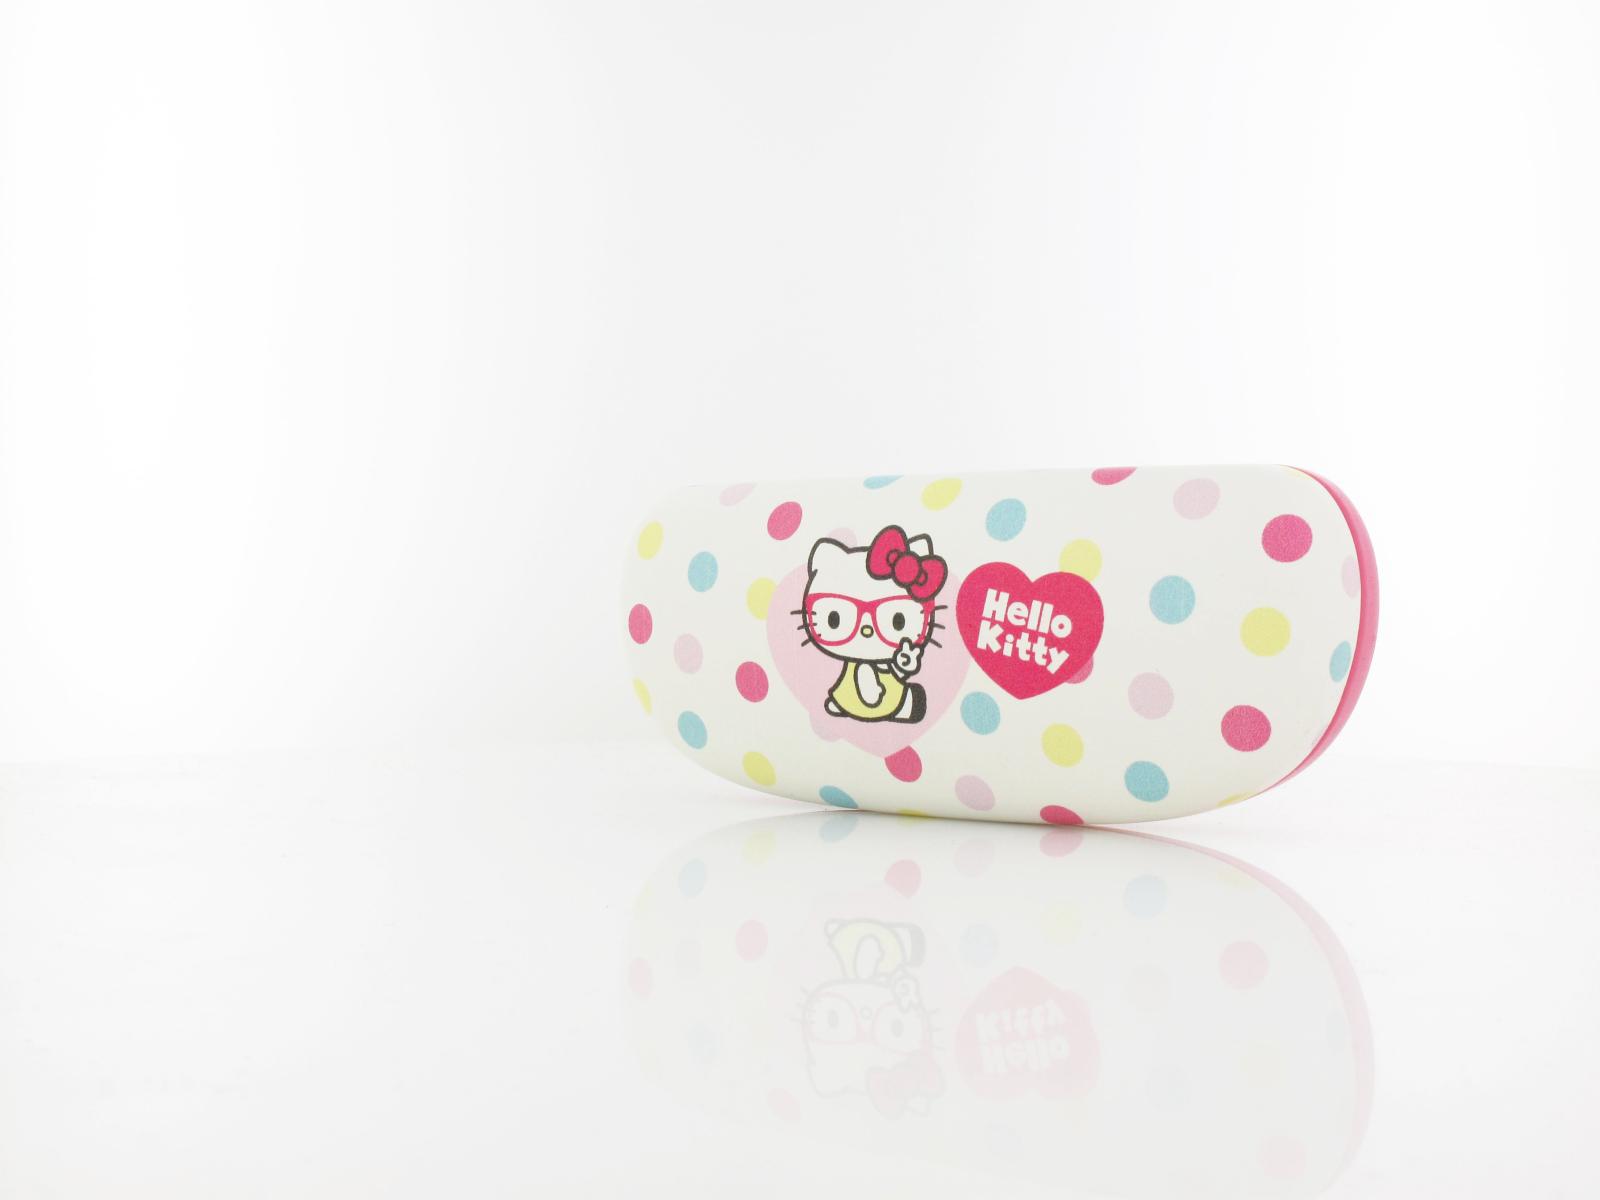 Hello Kitty | HE AA052 C08 43 | violet transparent